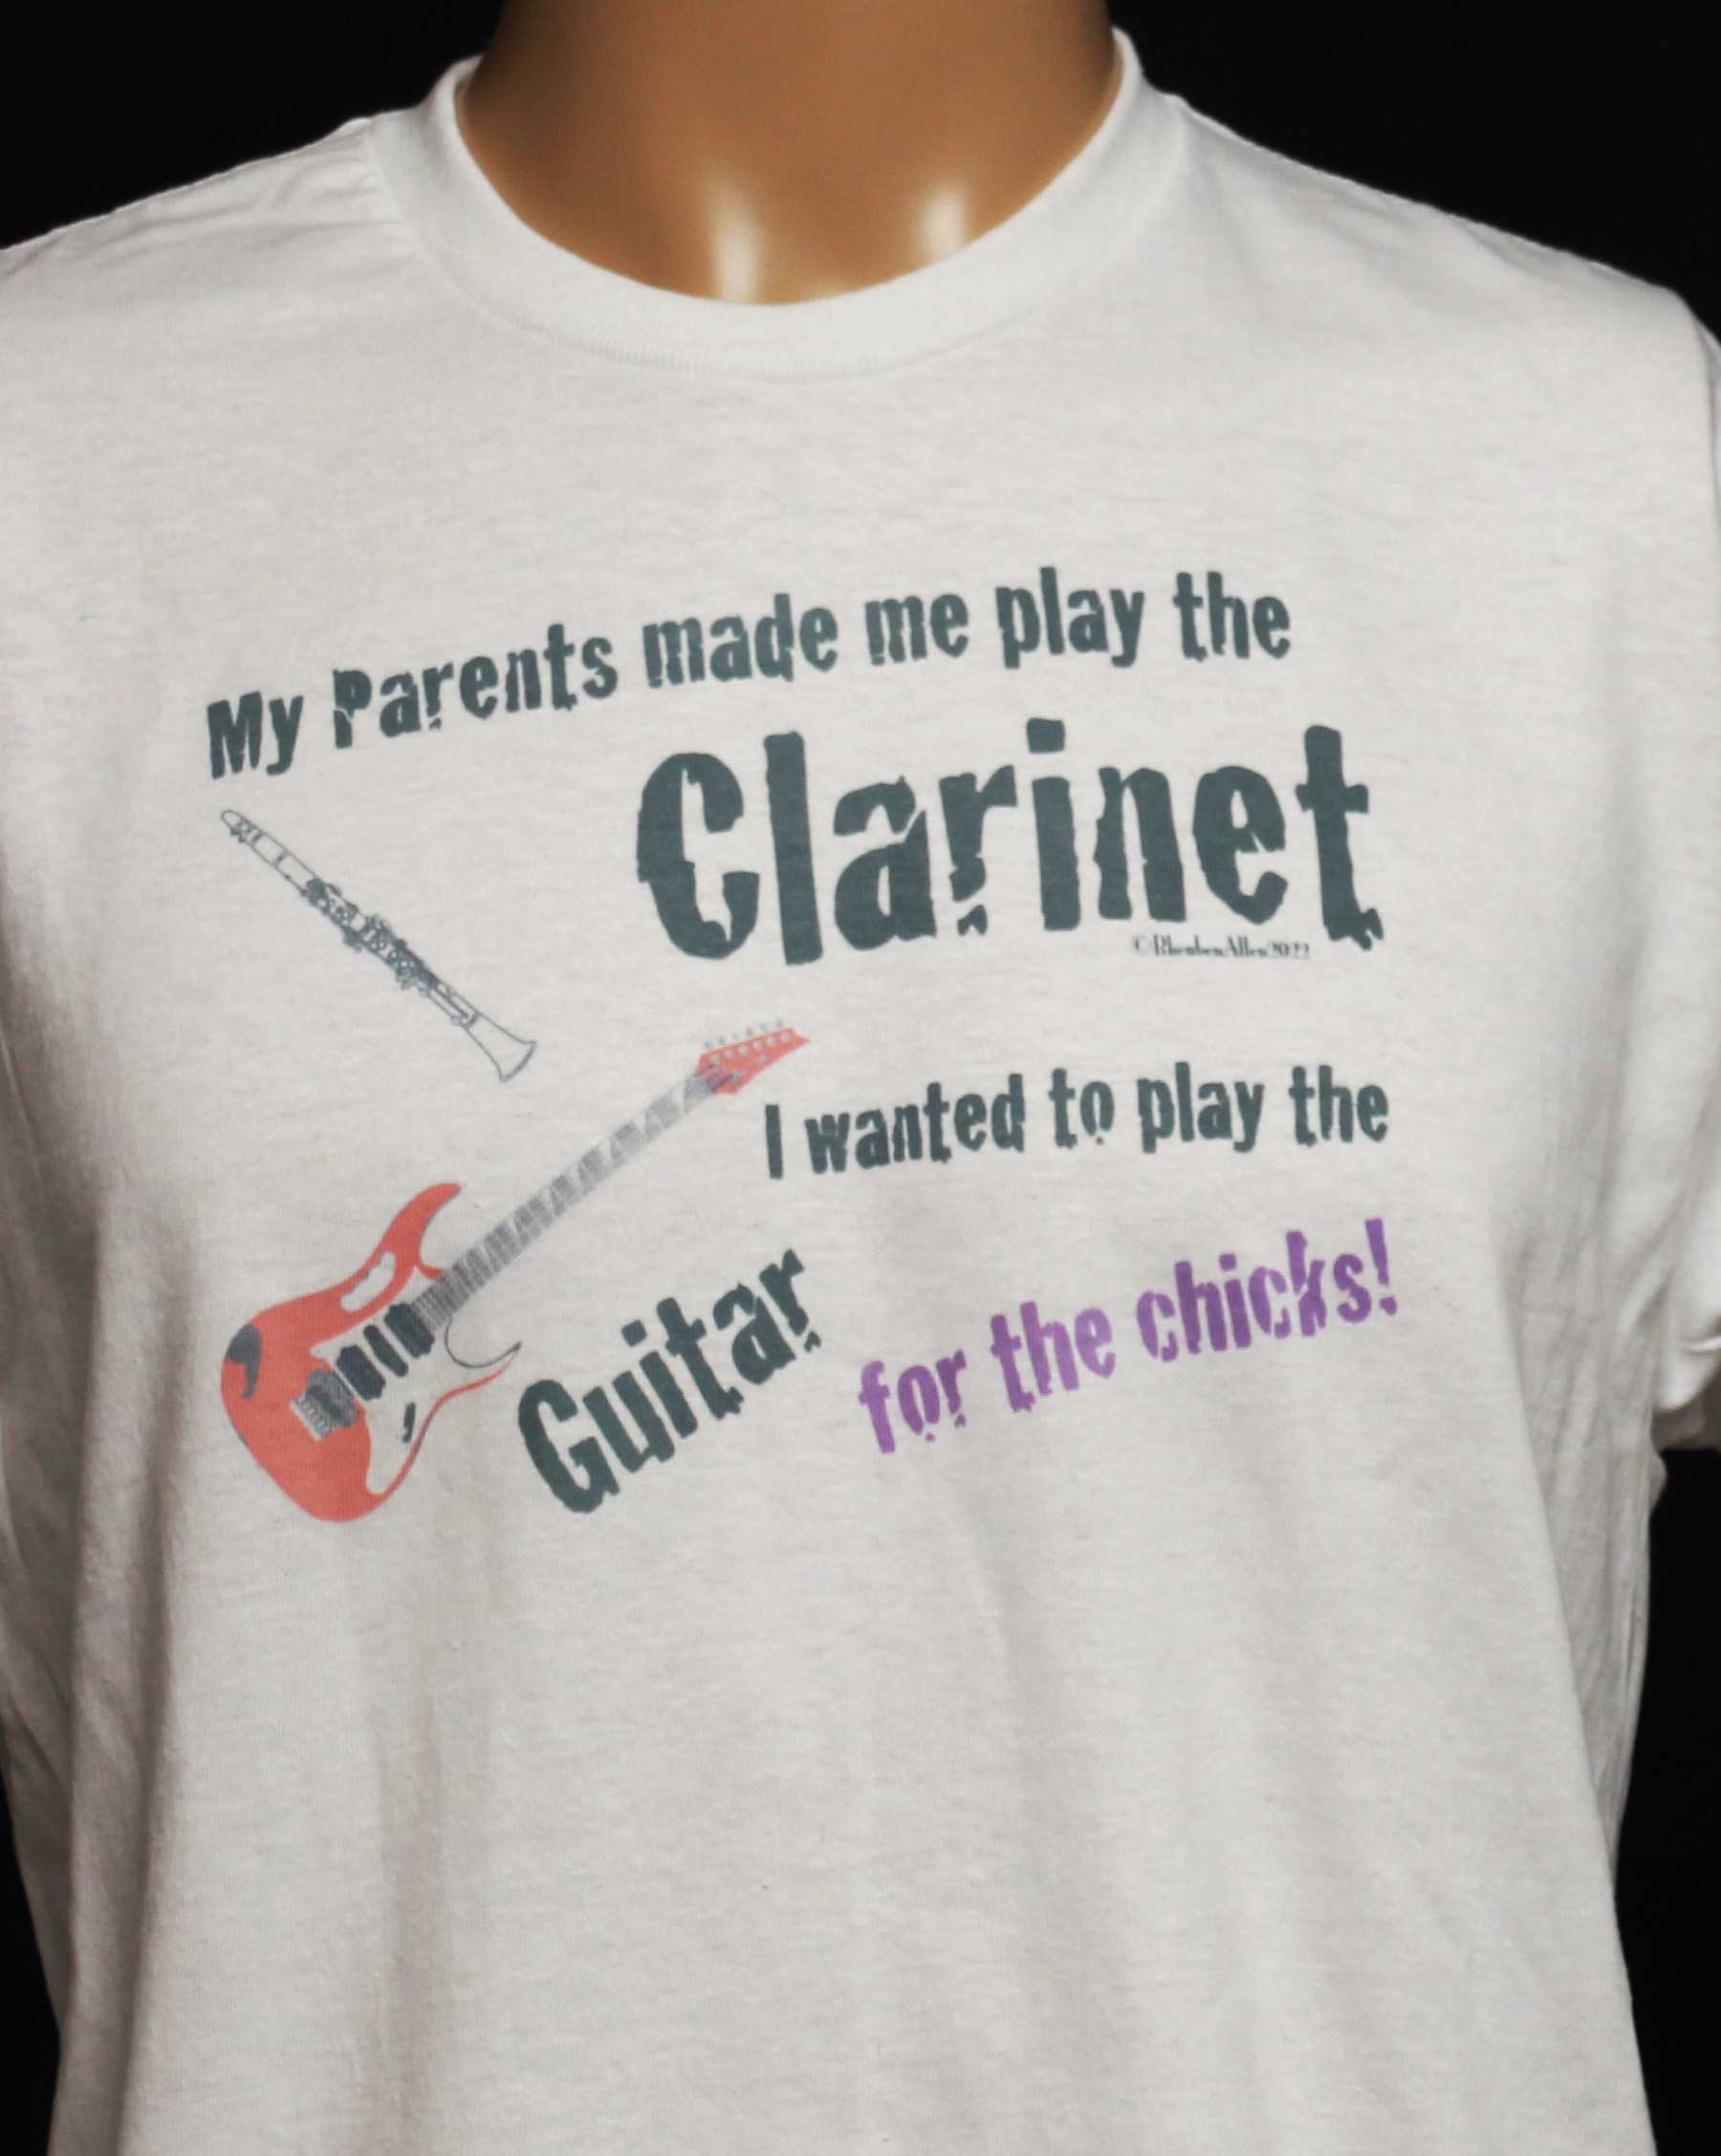 My parents made me play the clarinet.. I wanted to play the Guitar.. for the chicks!